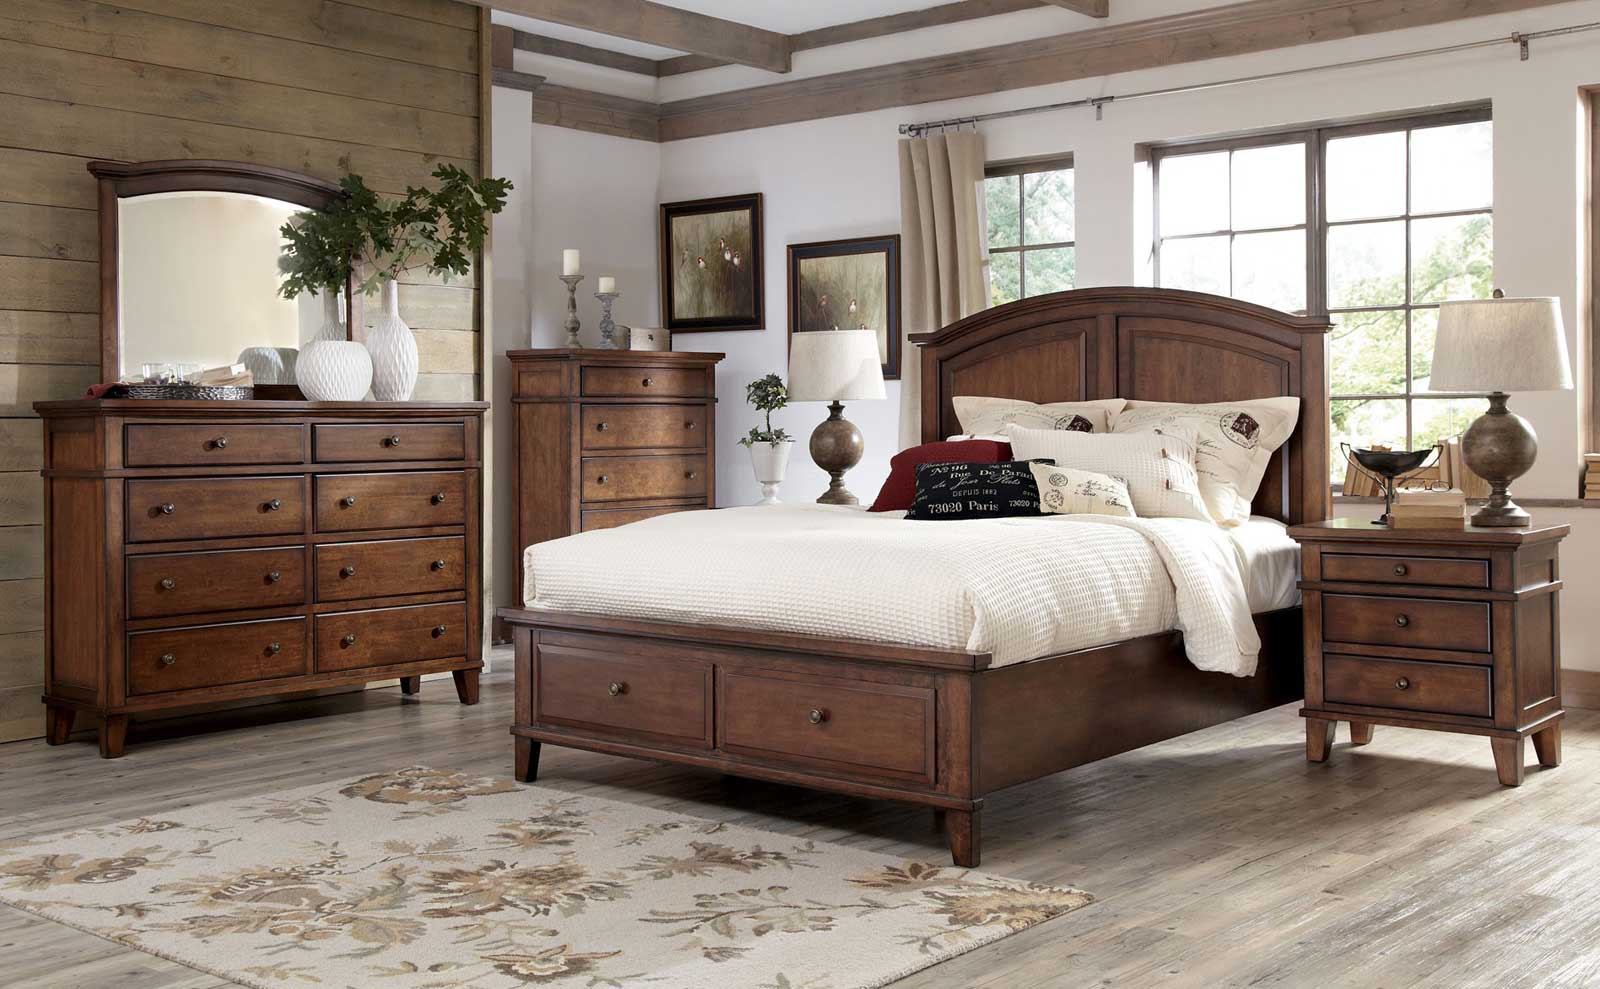 King Bedroom Ideas Traditional King Bedroom Sets Arrangement Ideas For Small Rooms Design With Rustic Teak Wood Under Bed Storage Design And Natural Laminate Wood Flooring Idea Also Adorable White Bed Spread Design Bedroom Enhance The King Bedroom Sets: The Soft Vineyard-6